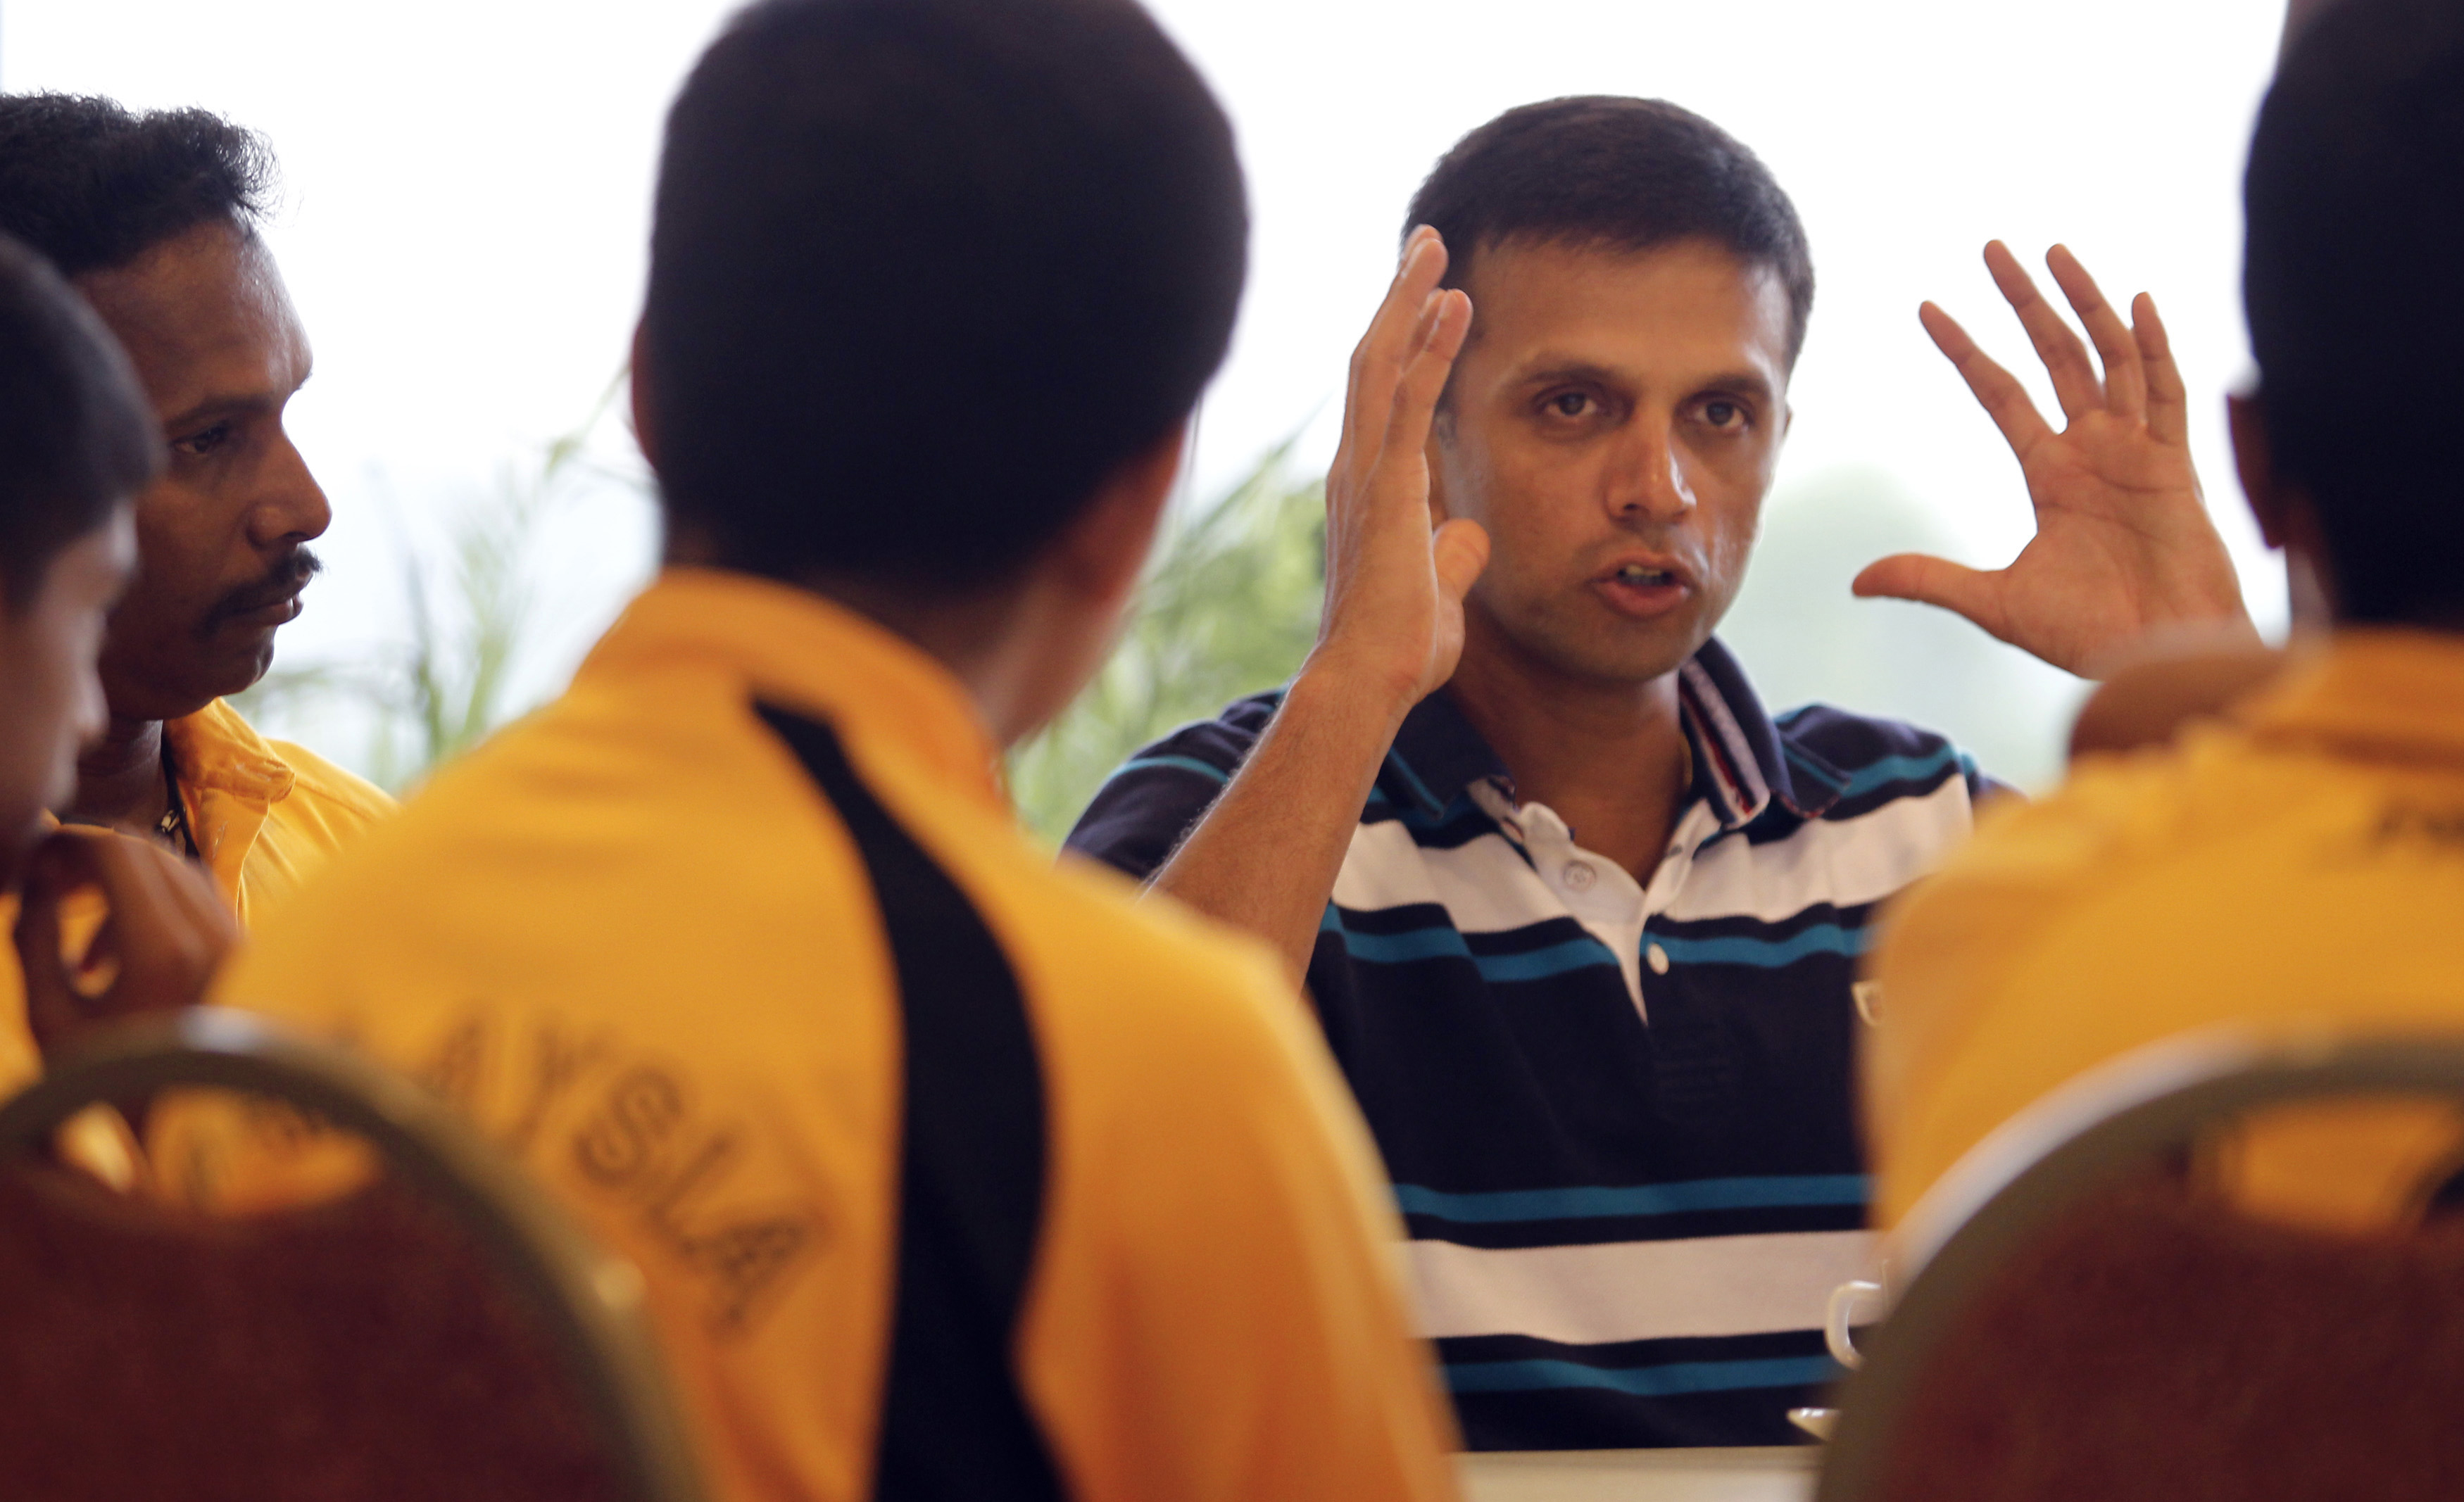 Former Indian cricket captain Dravid speaks to Malaysian U-16 cricketers during a cricket clinic in Kuala Lumpur